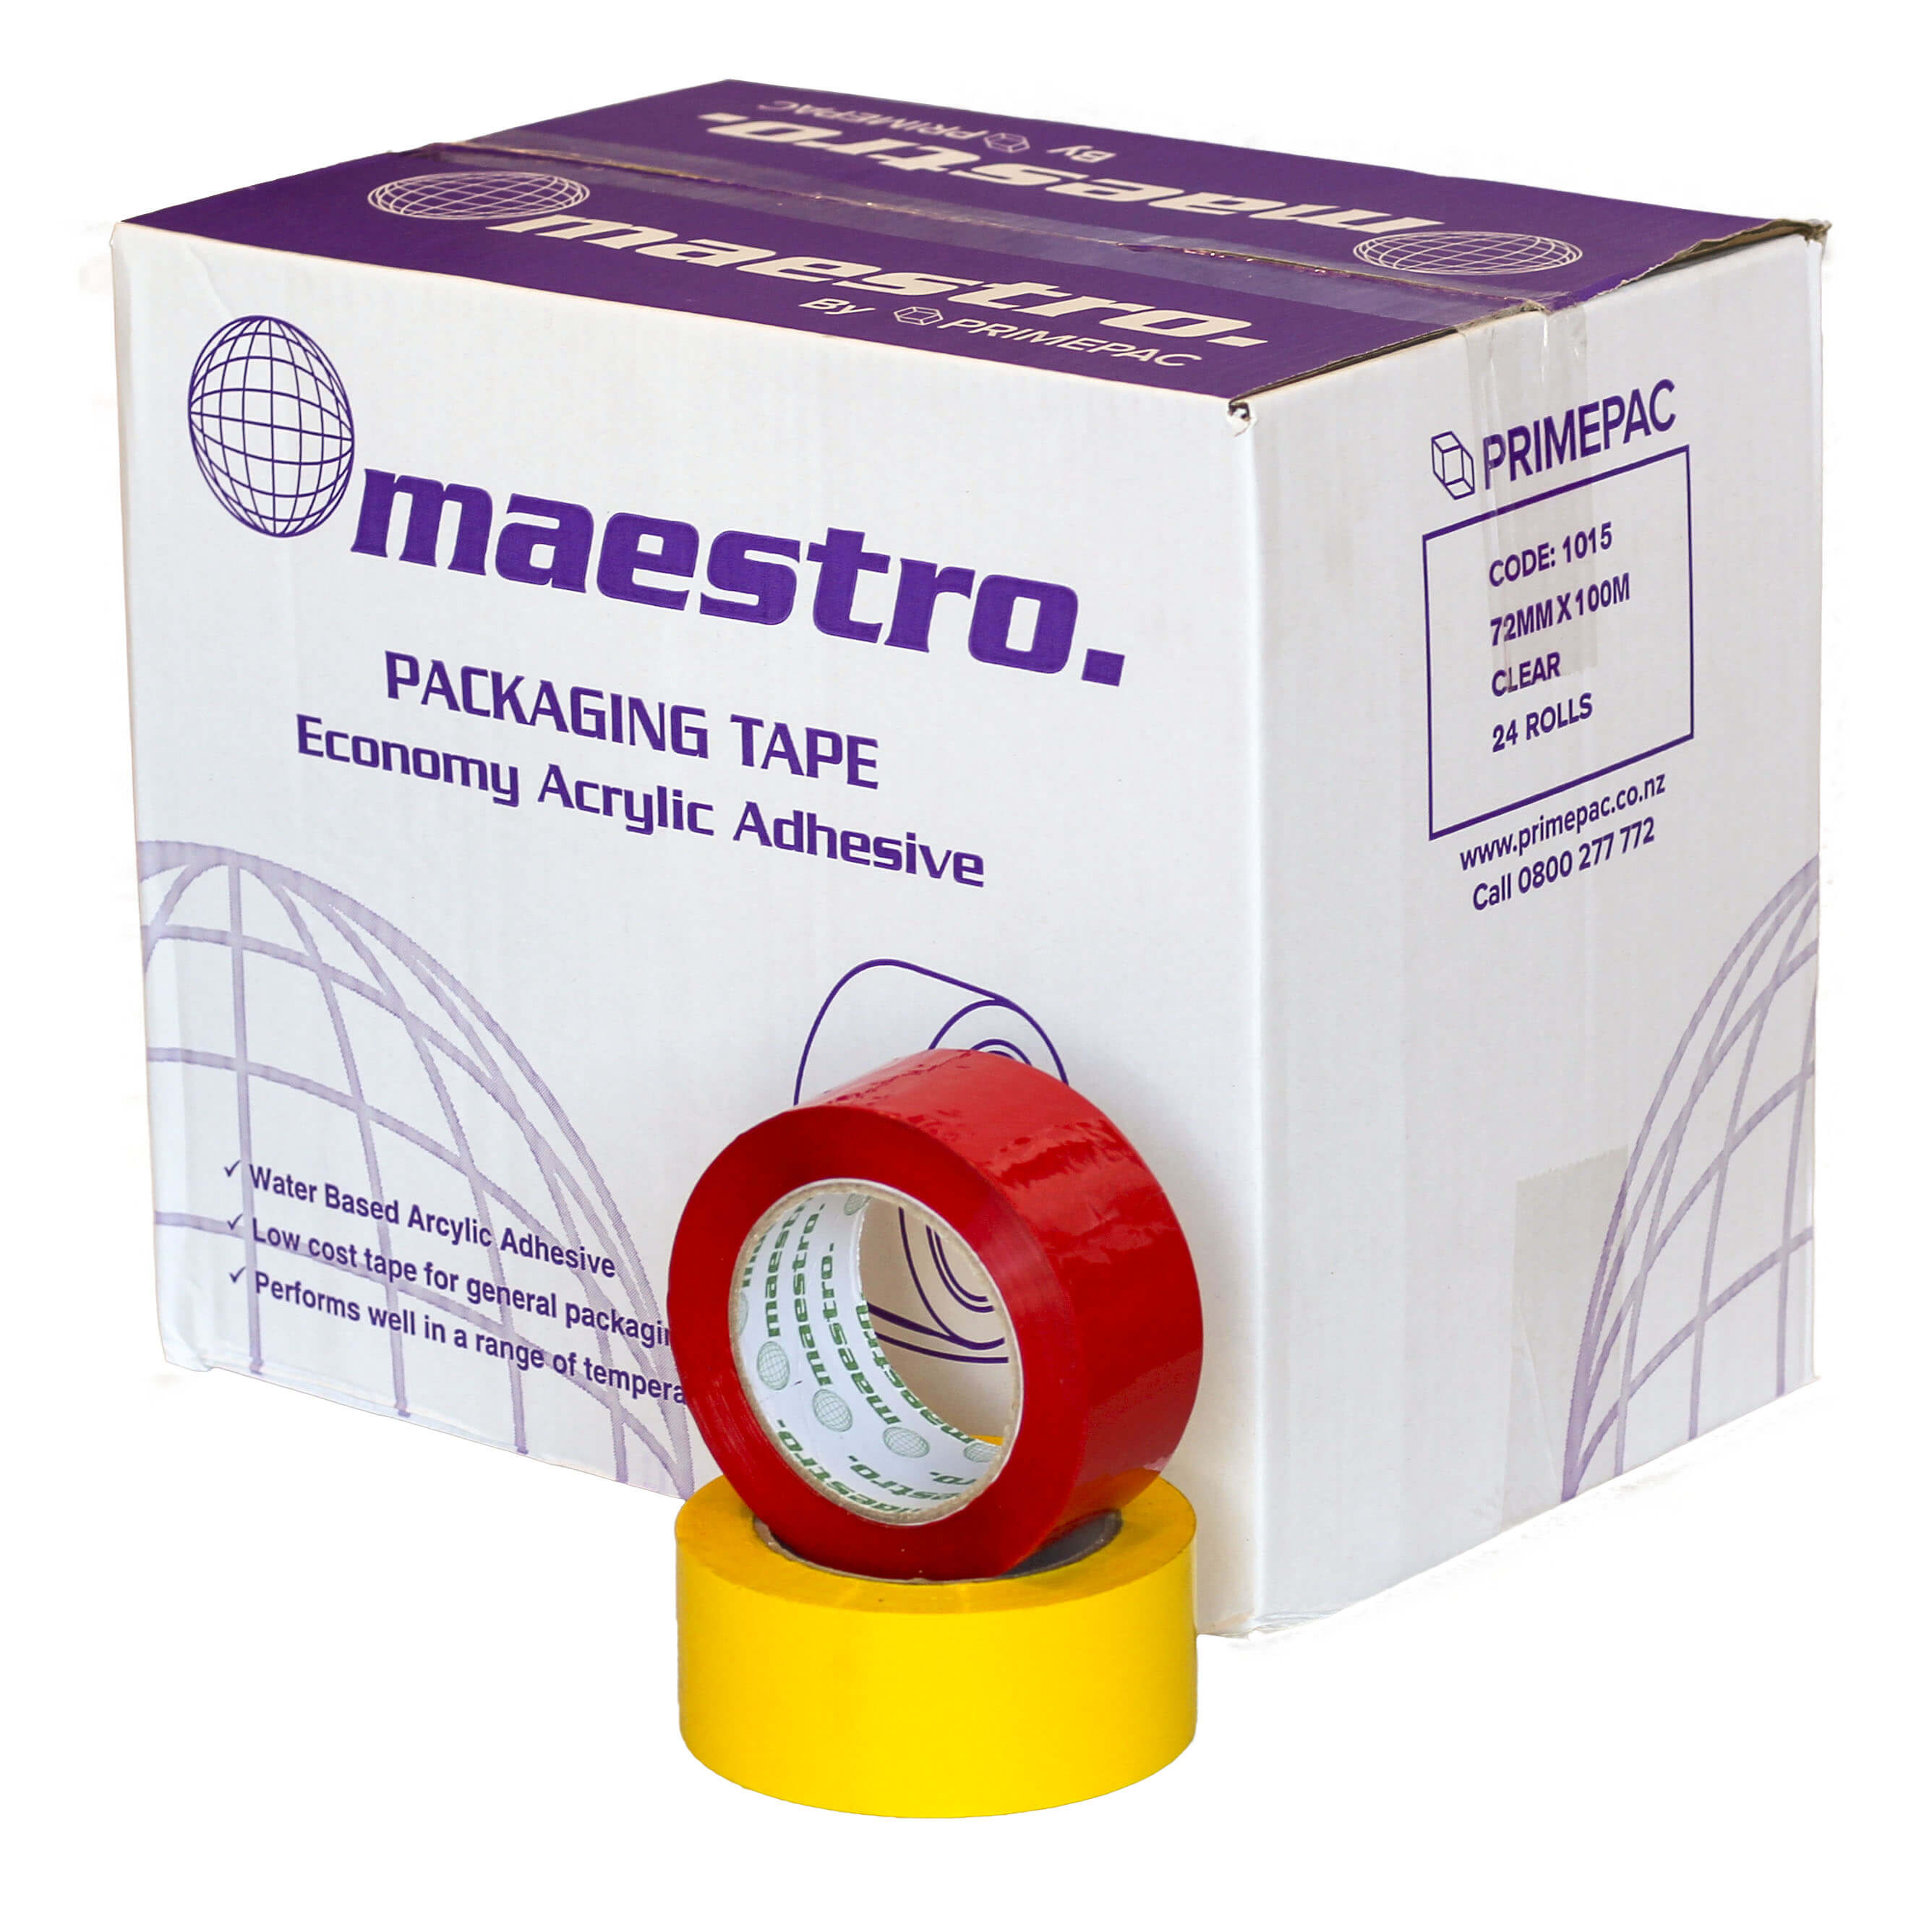 Coloured tape product image